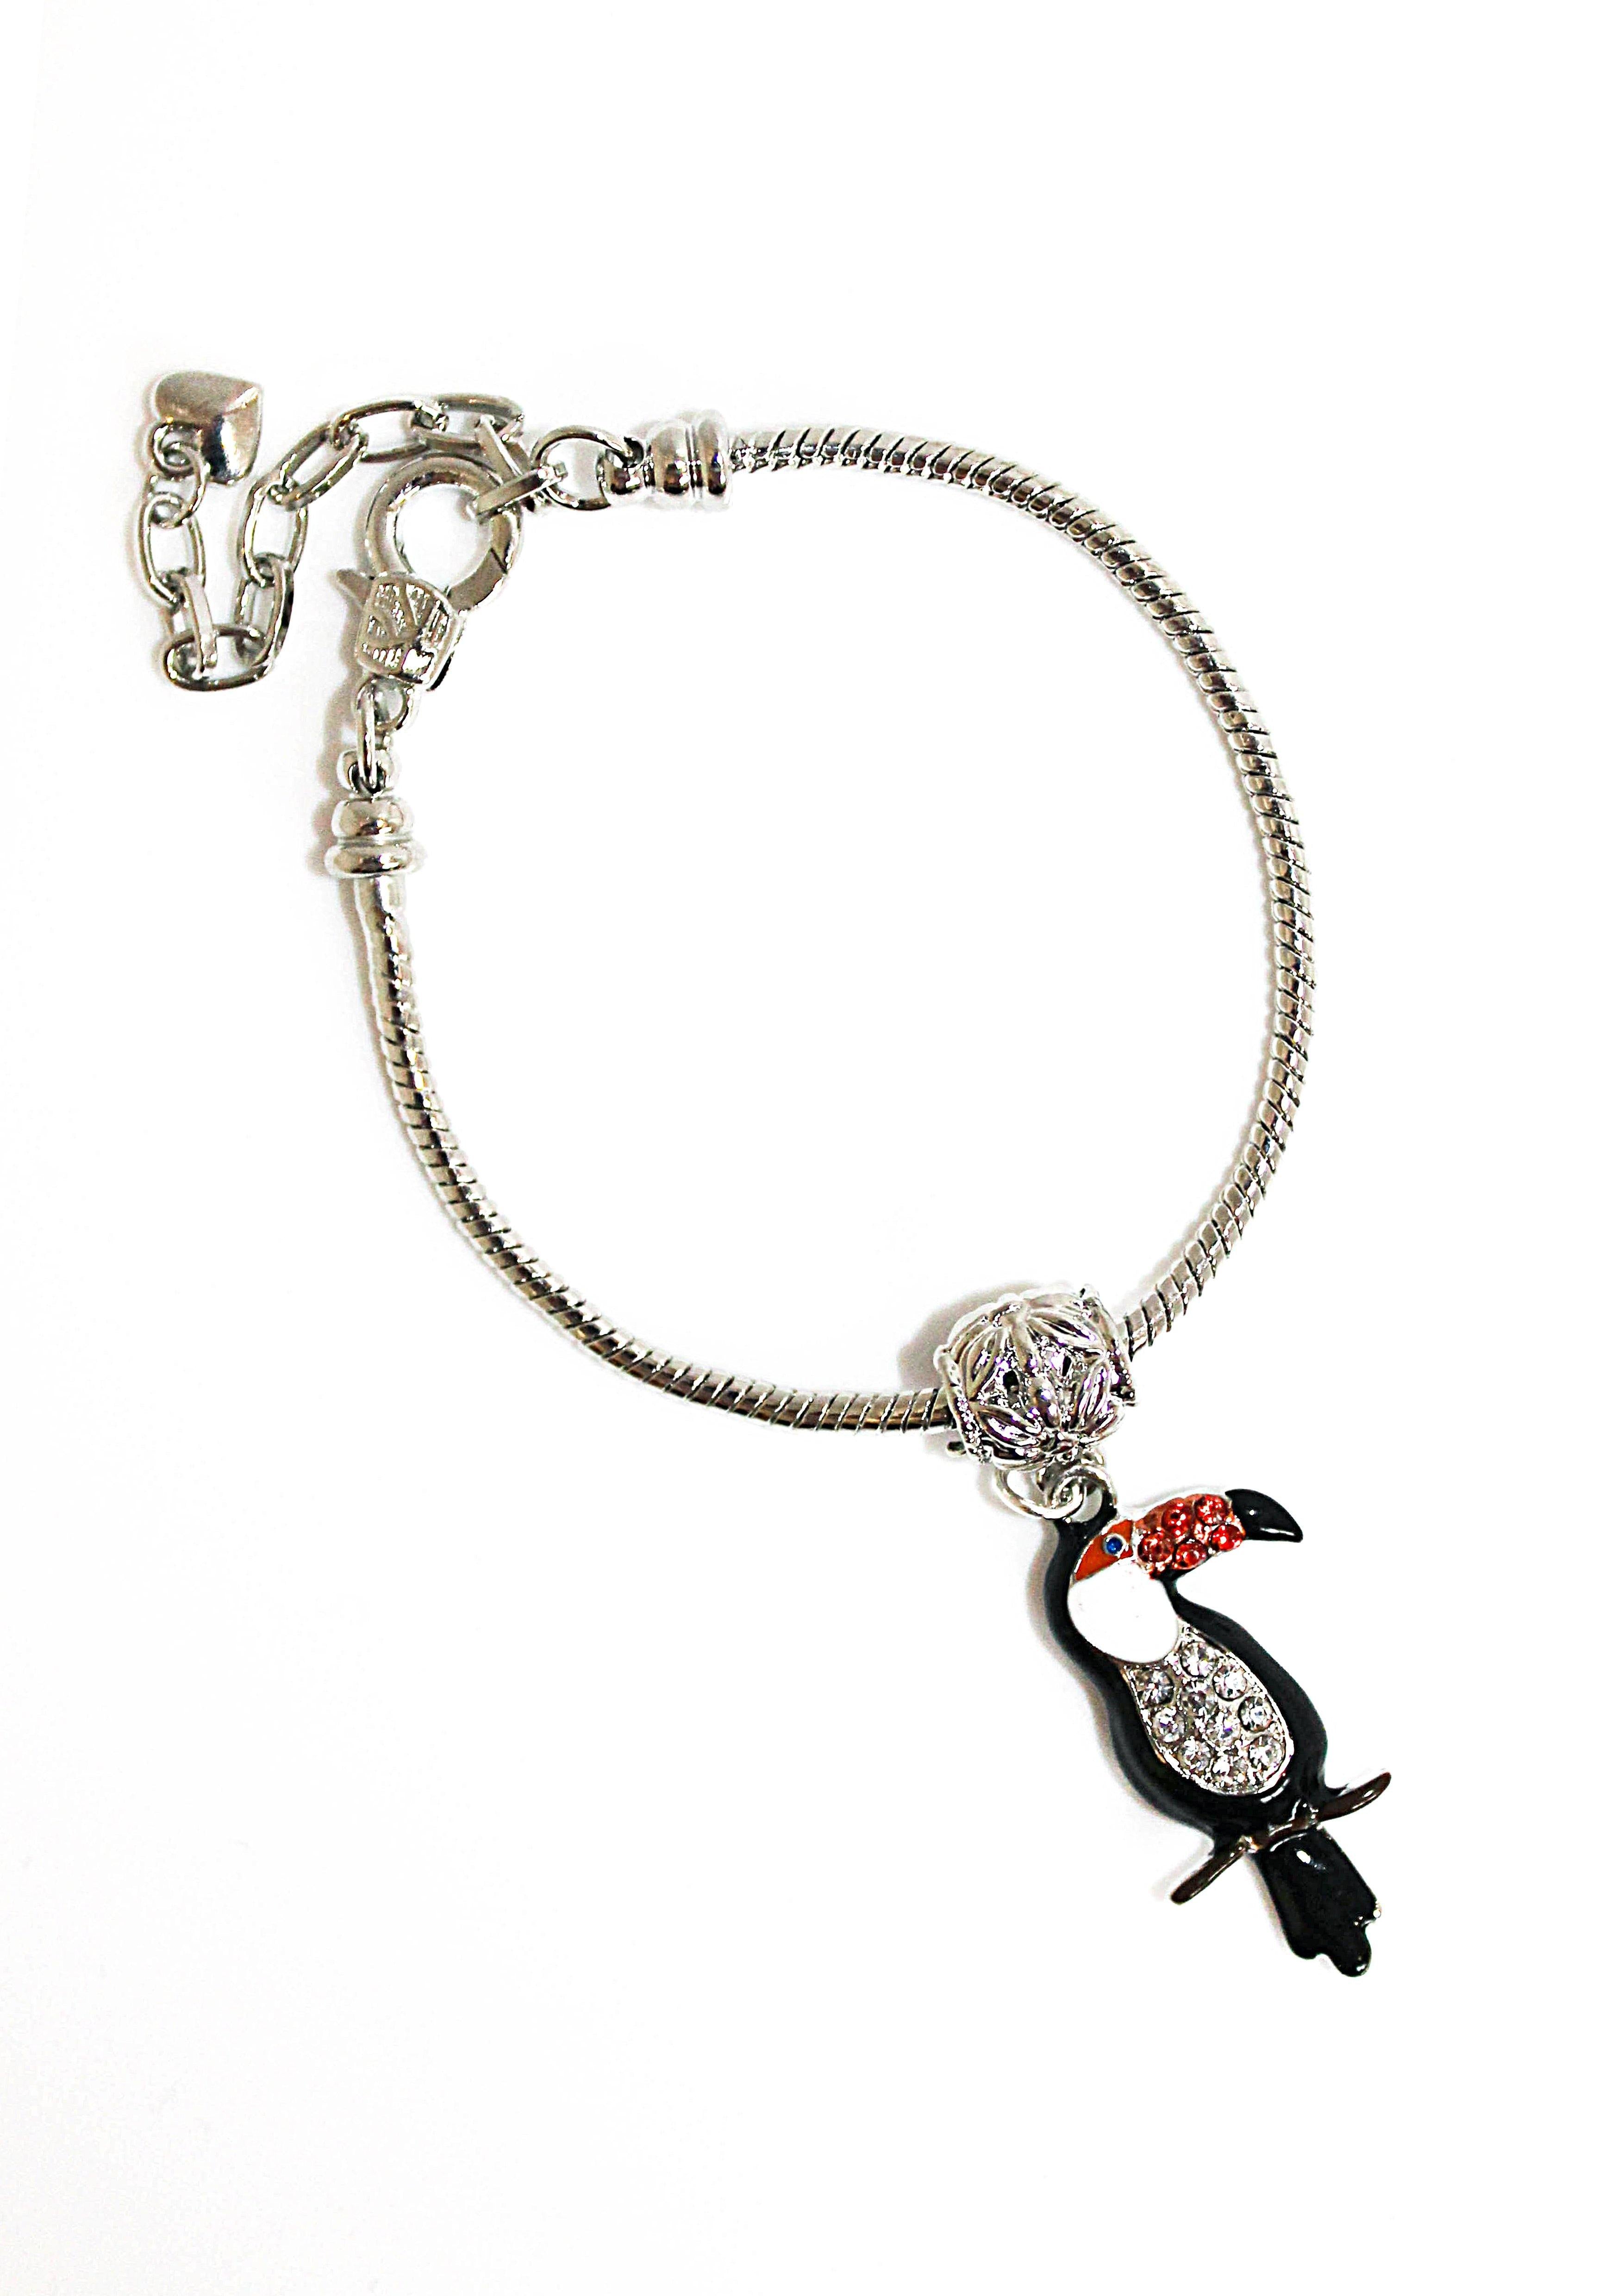 Toucan Charm Bracelet - Wildtouch - Wildtouch